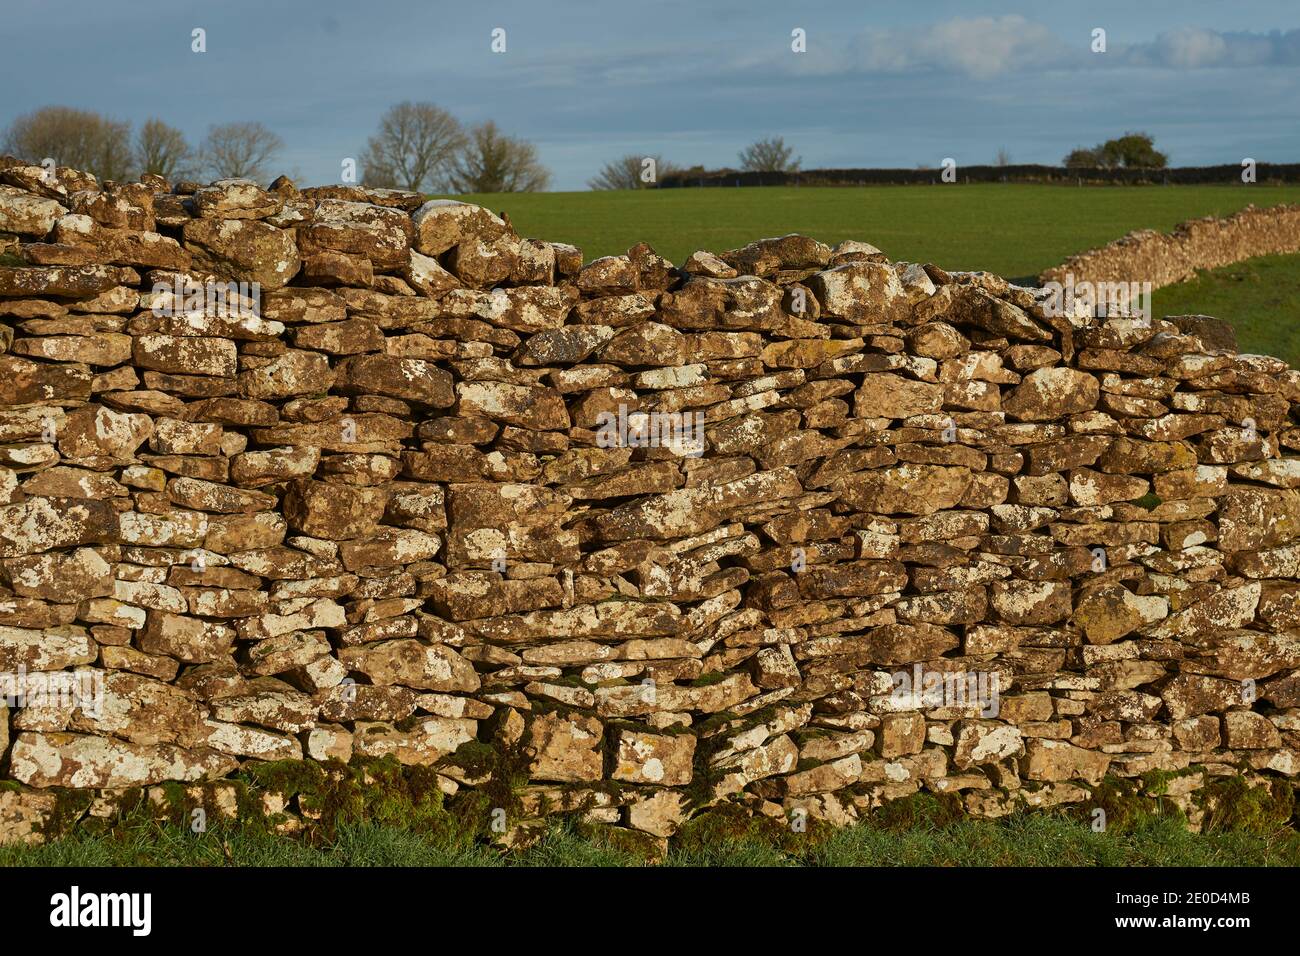 Dry stone walls marking field boundaries in the Woolley Valley, an Area of Outstanding Natural Beauty in the Cotswolds on the outskirts of Bath, UK Stock Photo